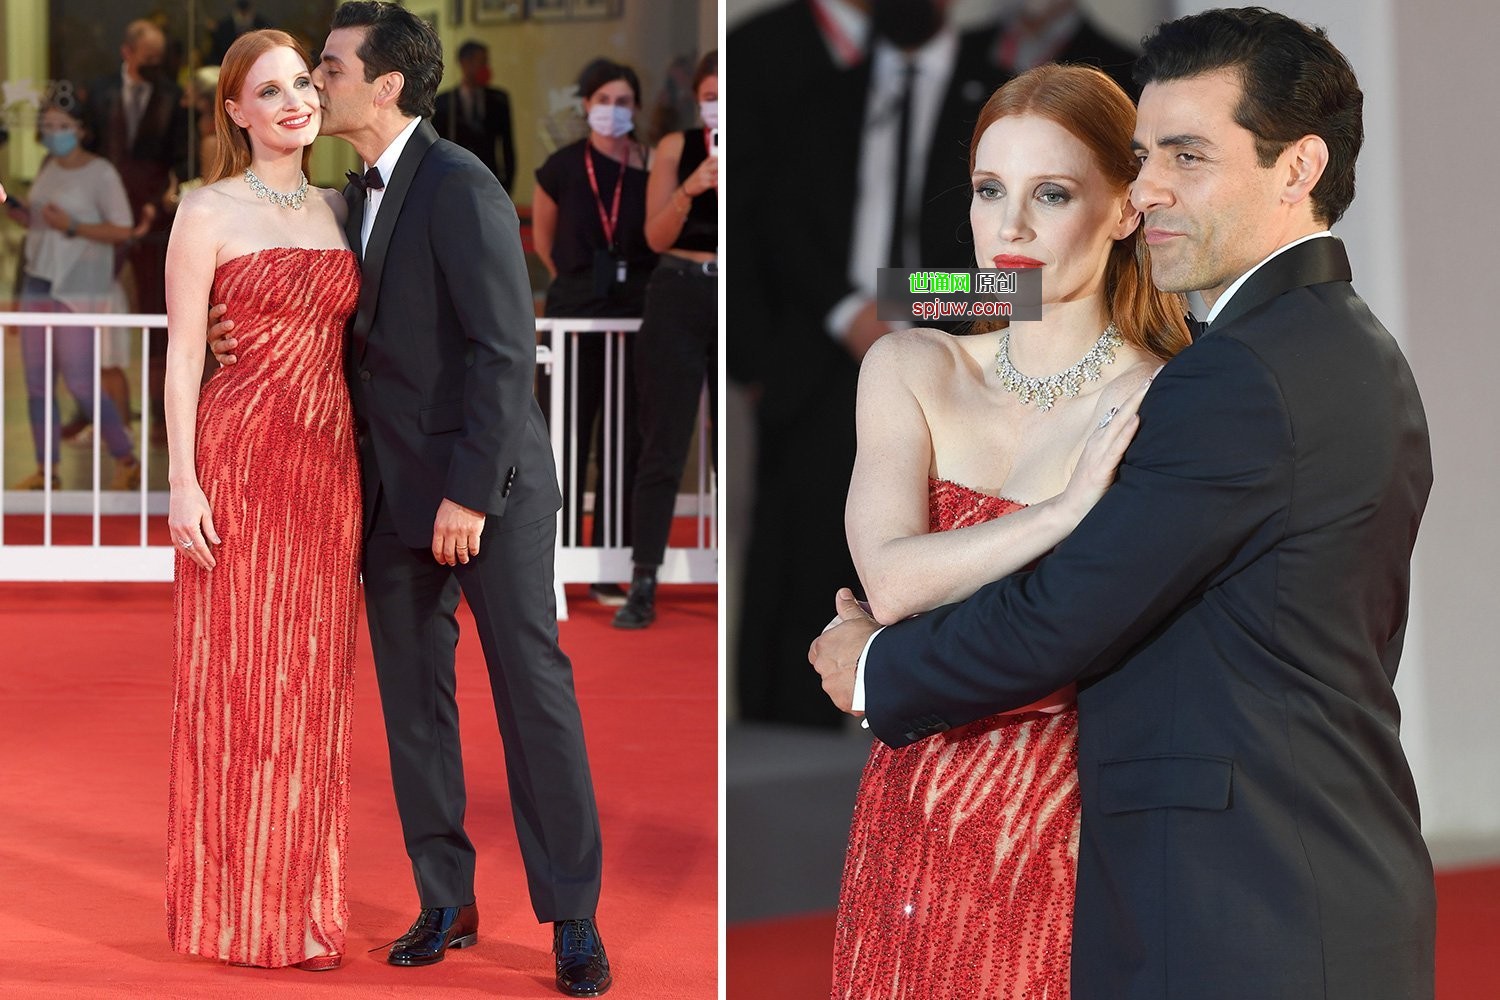 Jessica Chastain & Oscar Isaac display their on-screen chemistry in Venice